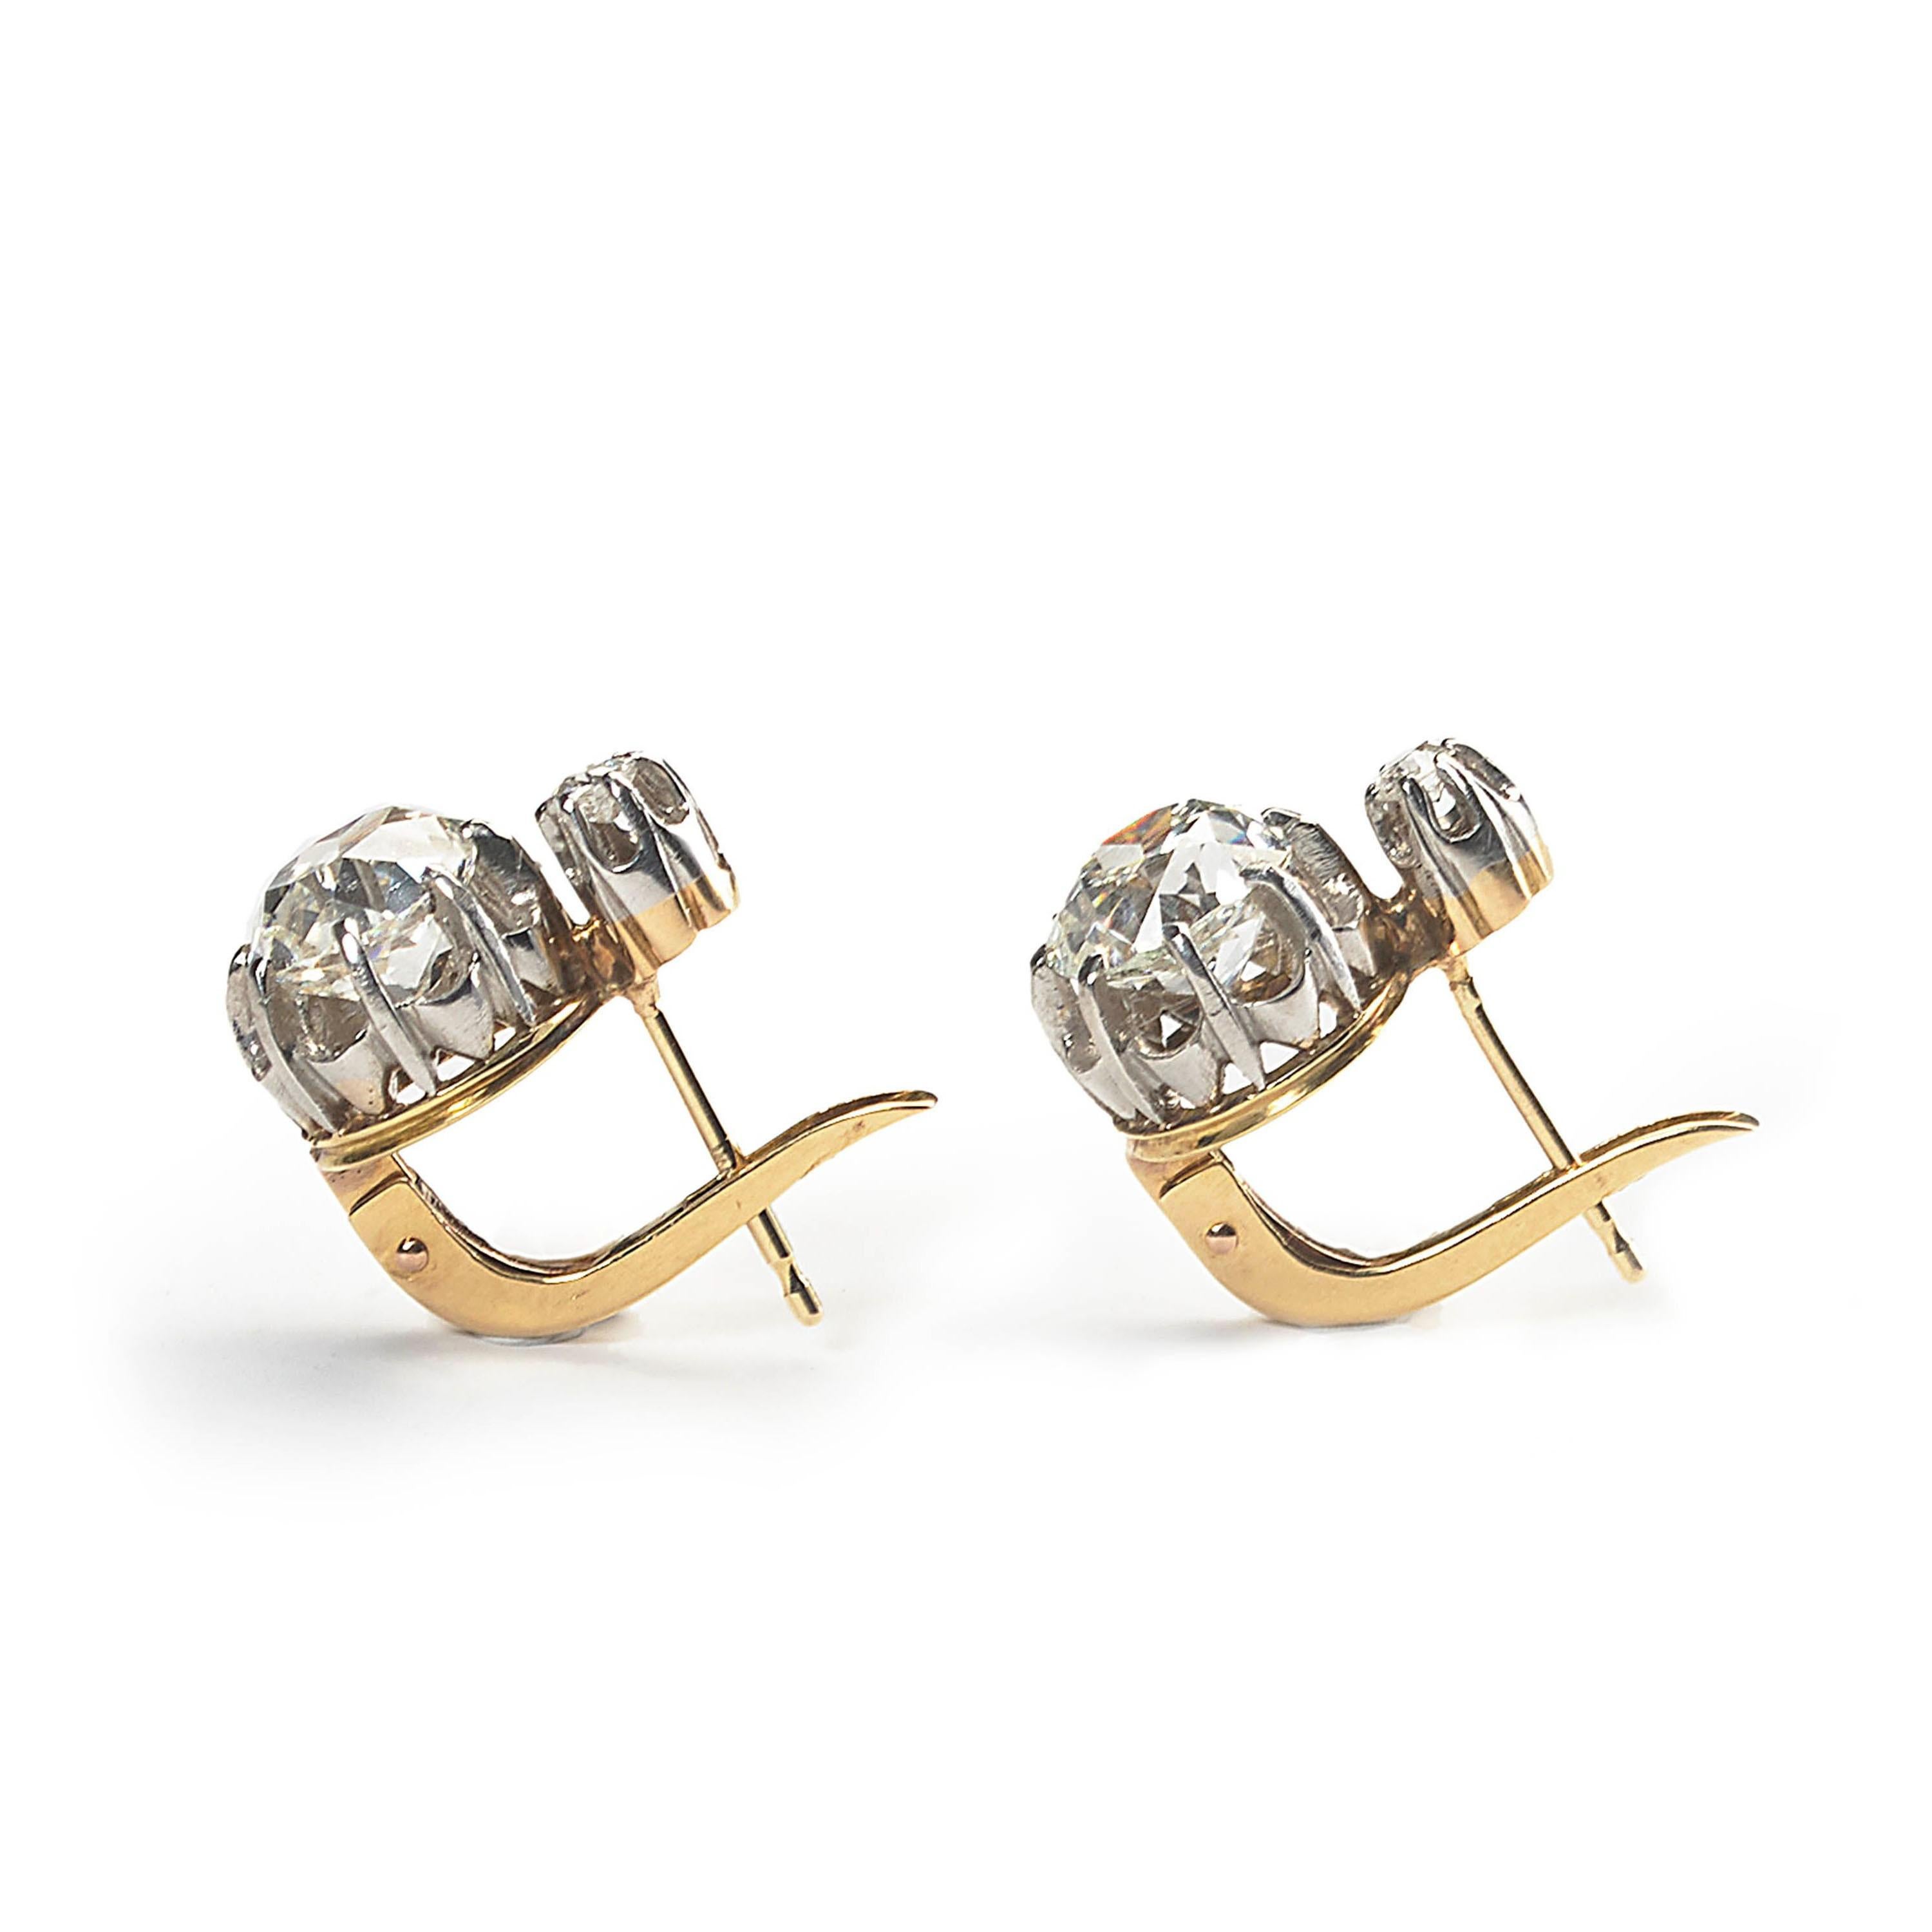 Edwardian Antique Old-Cut Diamond Platinum and Gold Earrings, 2.60 Carat, Circa 1910 For Sale